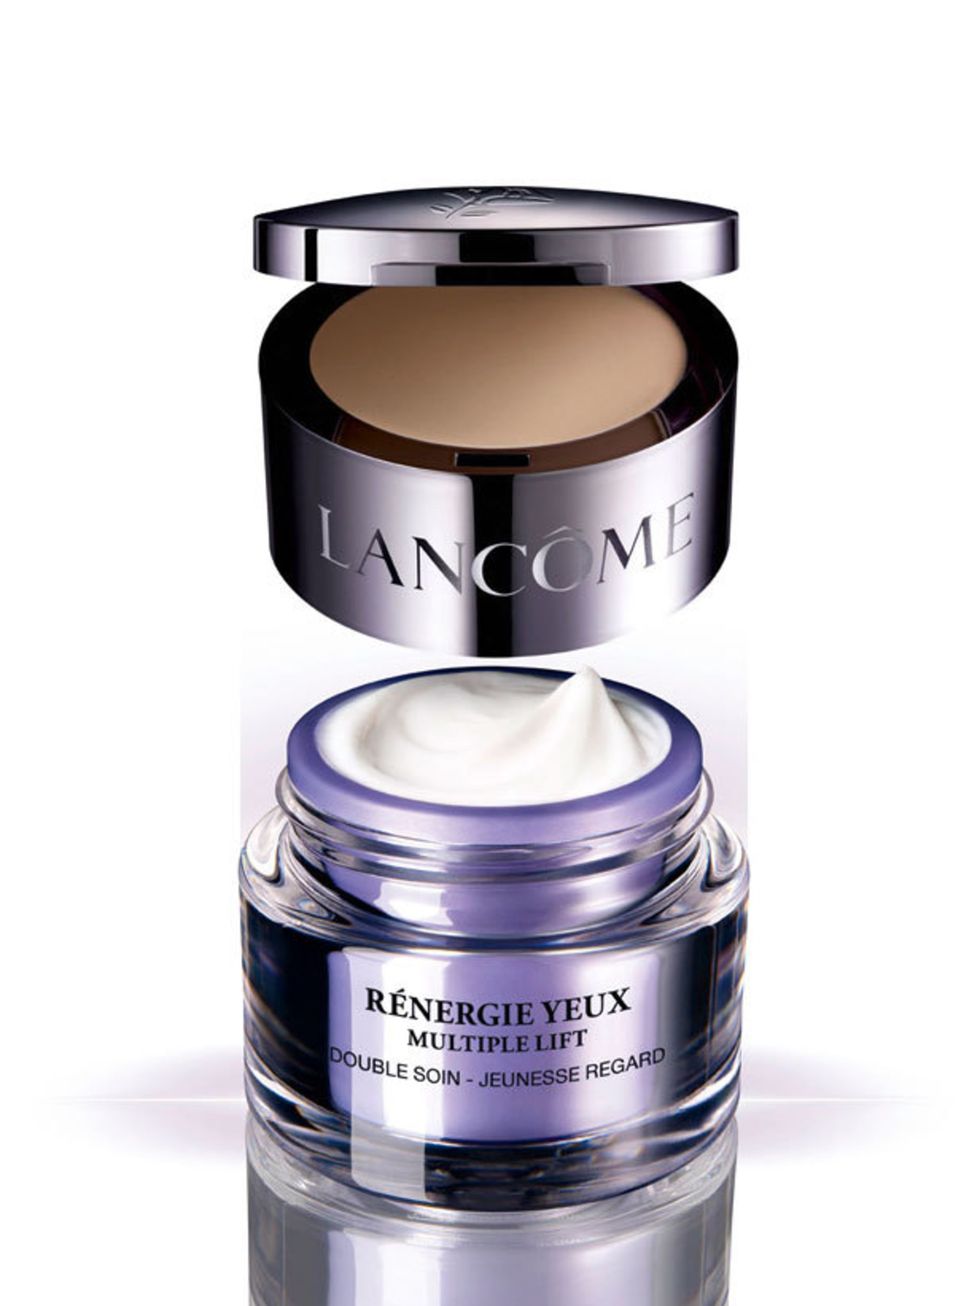 <p><strong>Best Eye Cream</strong></p><p><a href="http://www.lancome.co.uk/_en/_gb/renergie/renergie-yeux-multiple-lift-09042u.aspx">Lancome</a> Renergie Yeux Multiple Lift, £44.50</p>